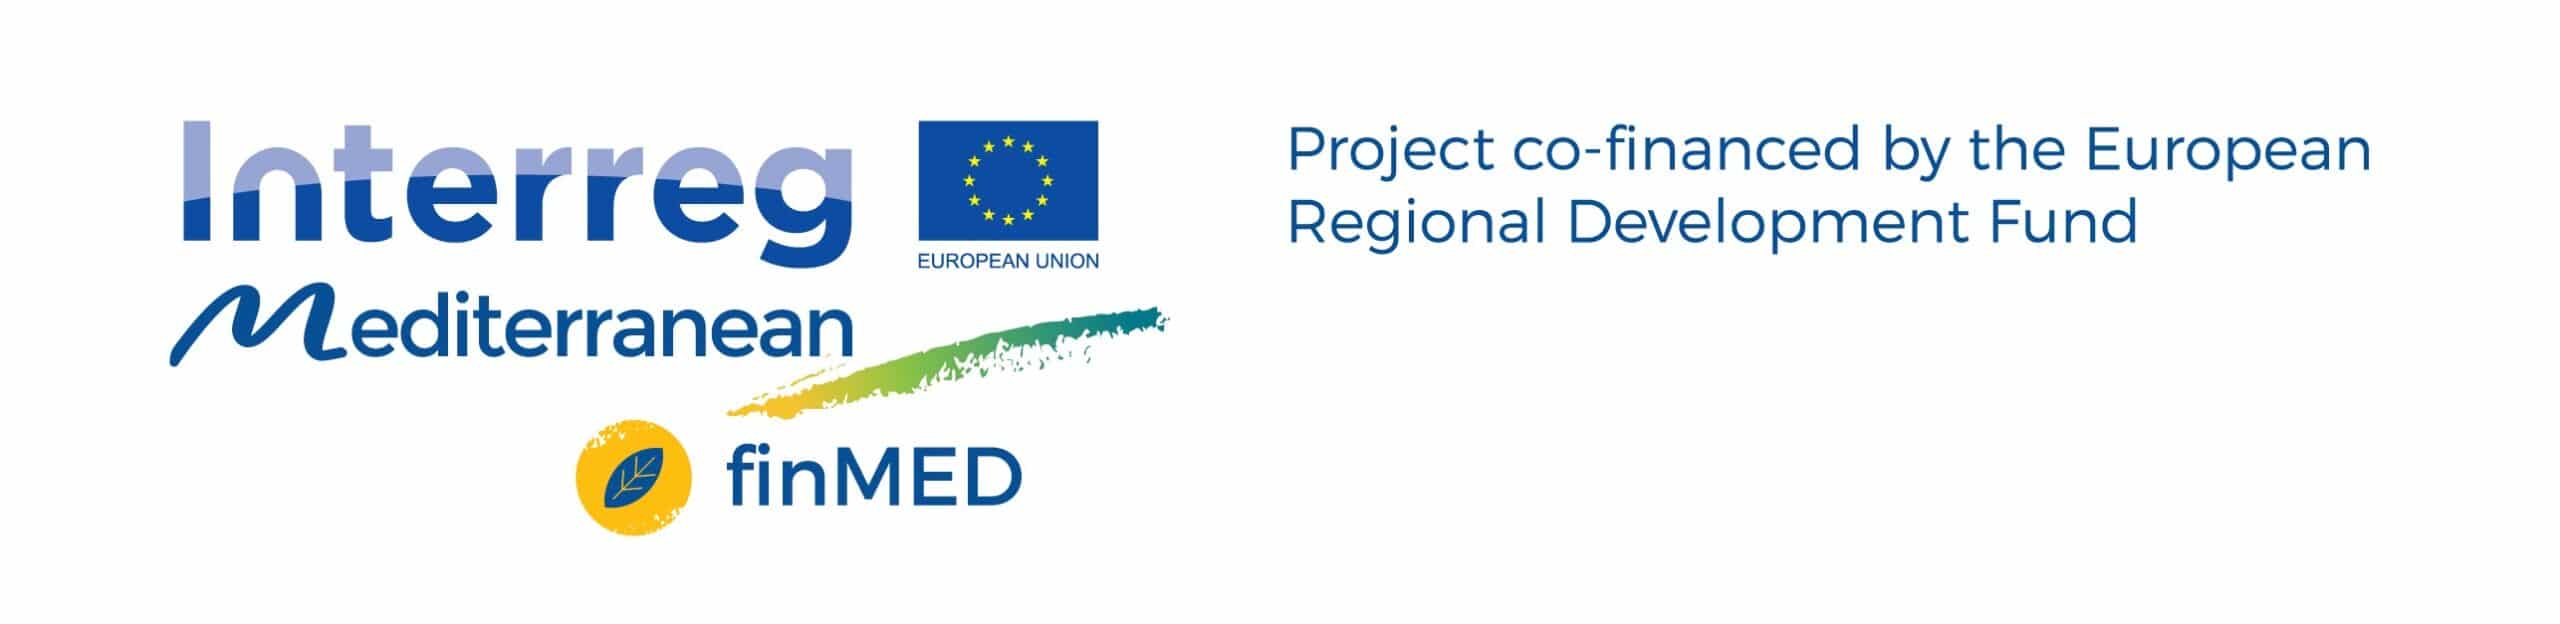 LOGO ERDF finMED En scaled finMED aims to increase funding for green innovation